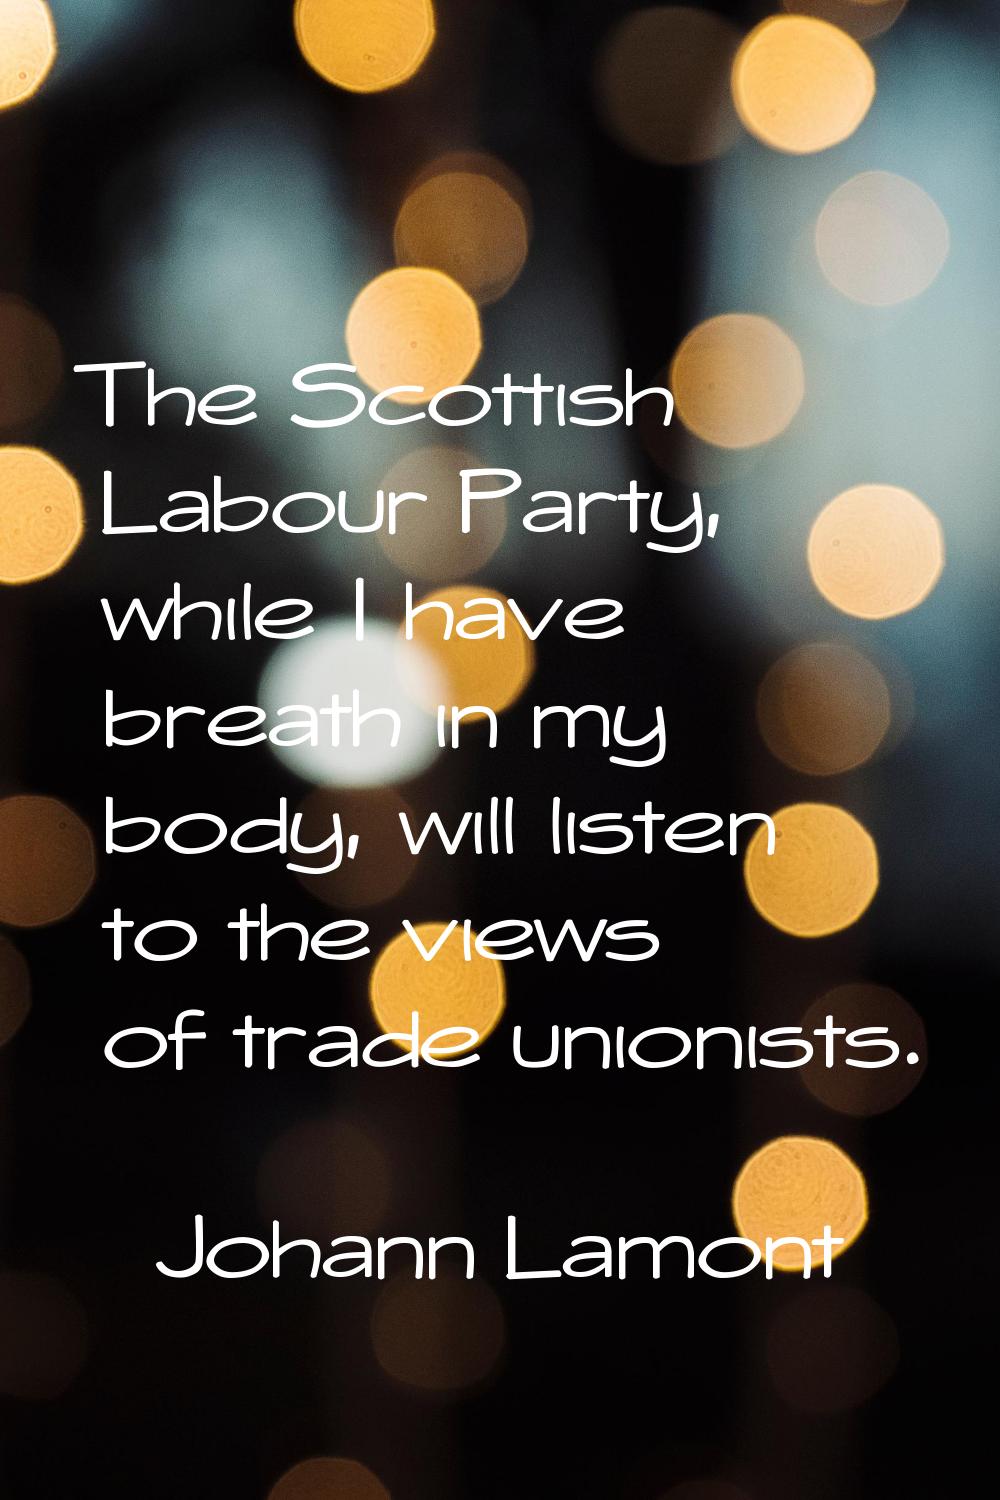 The Scottish Labour Party, while I have breath in my body, will listen to the views of trade unioni